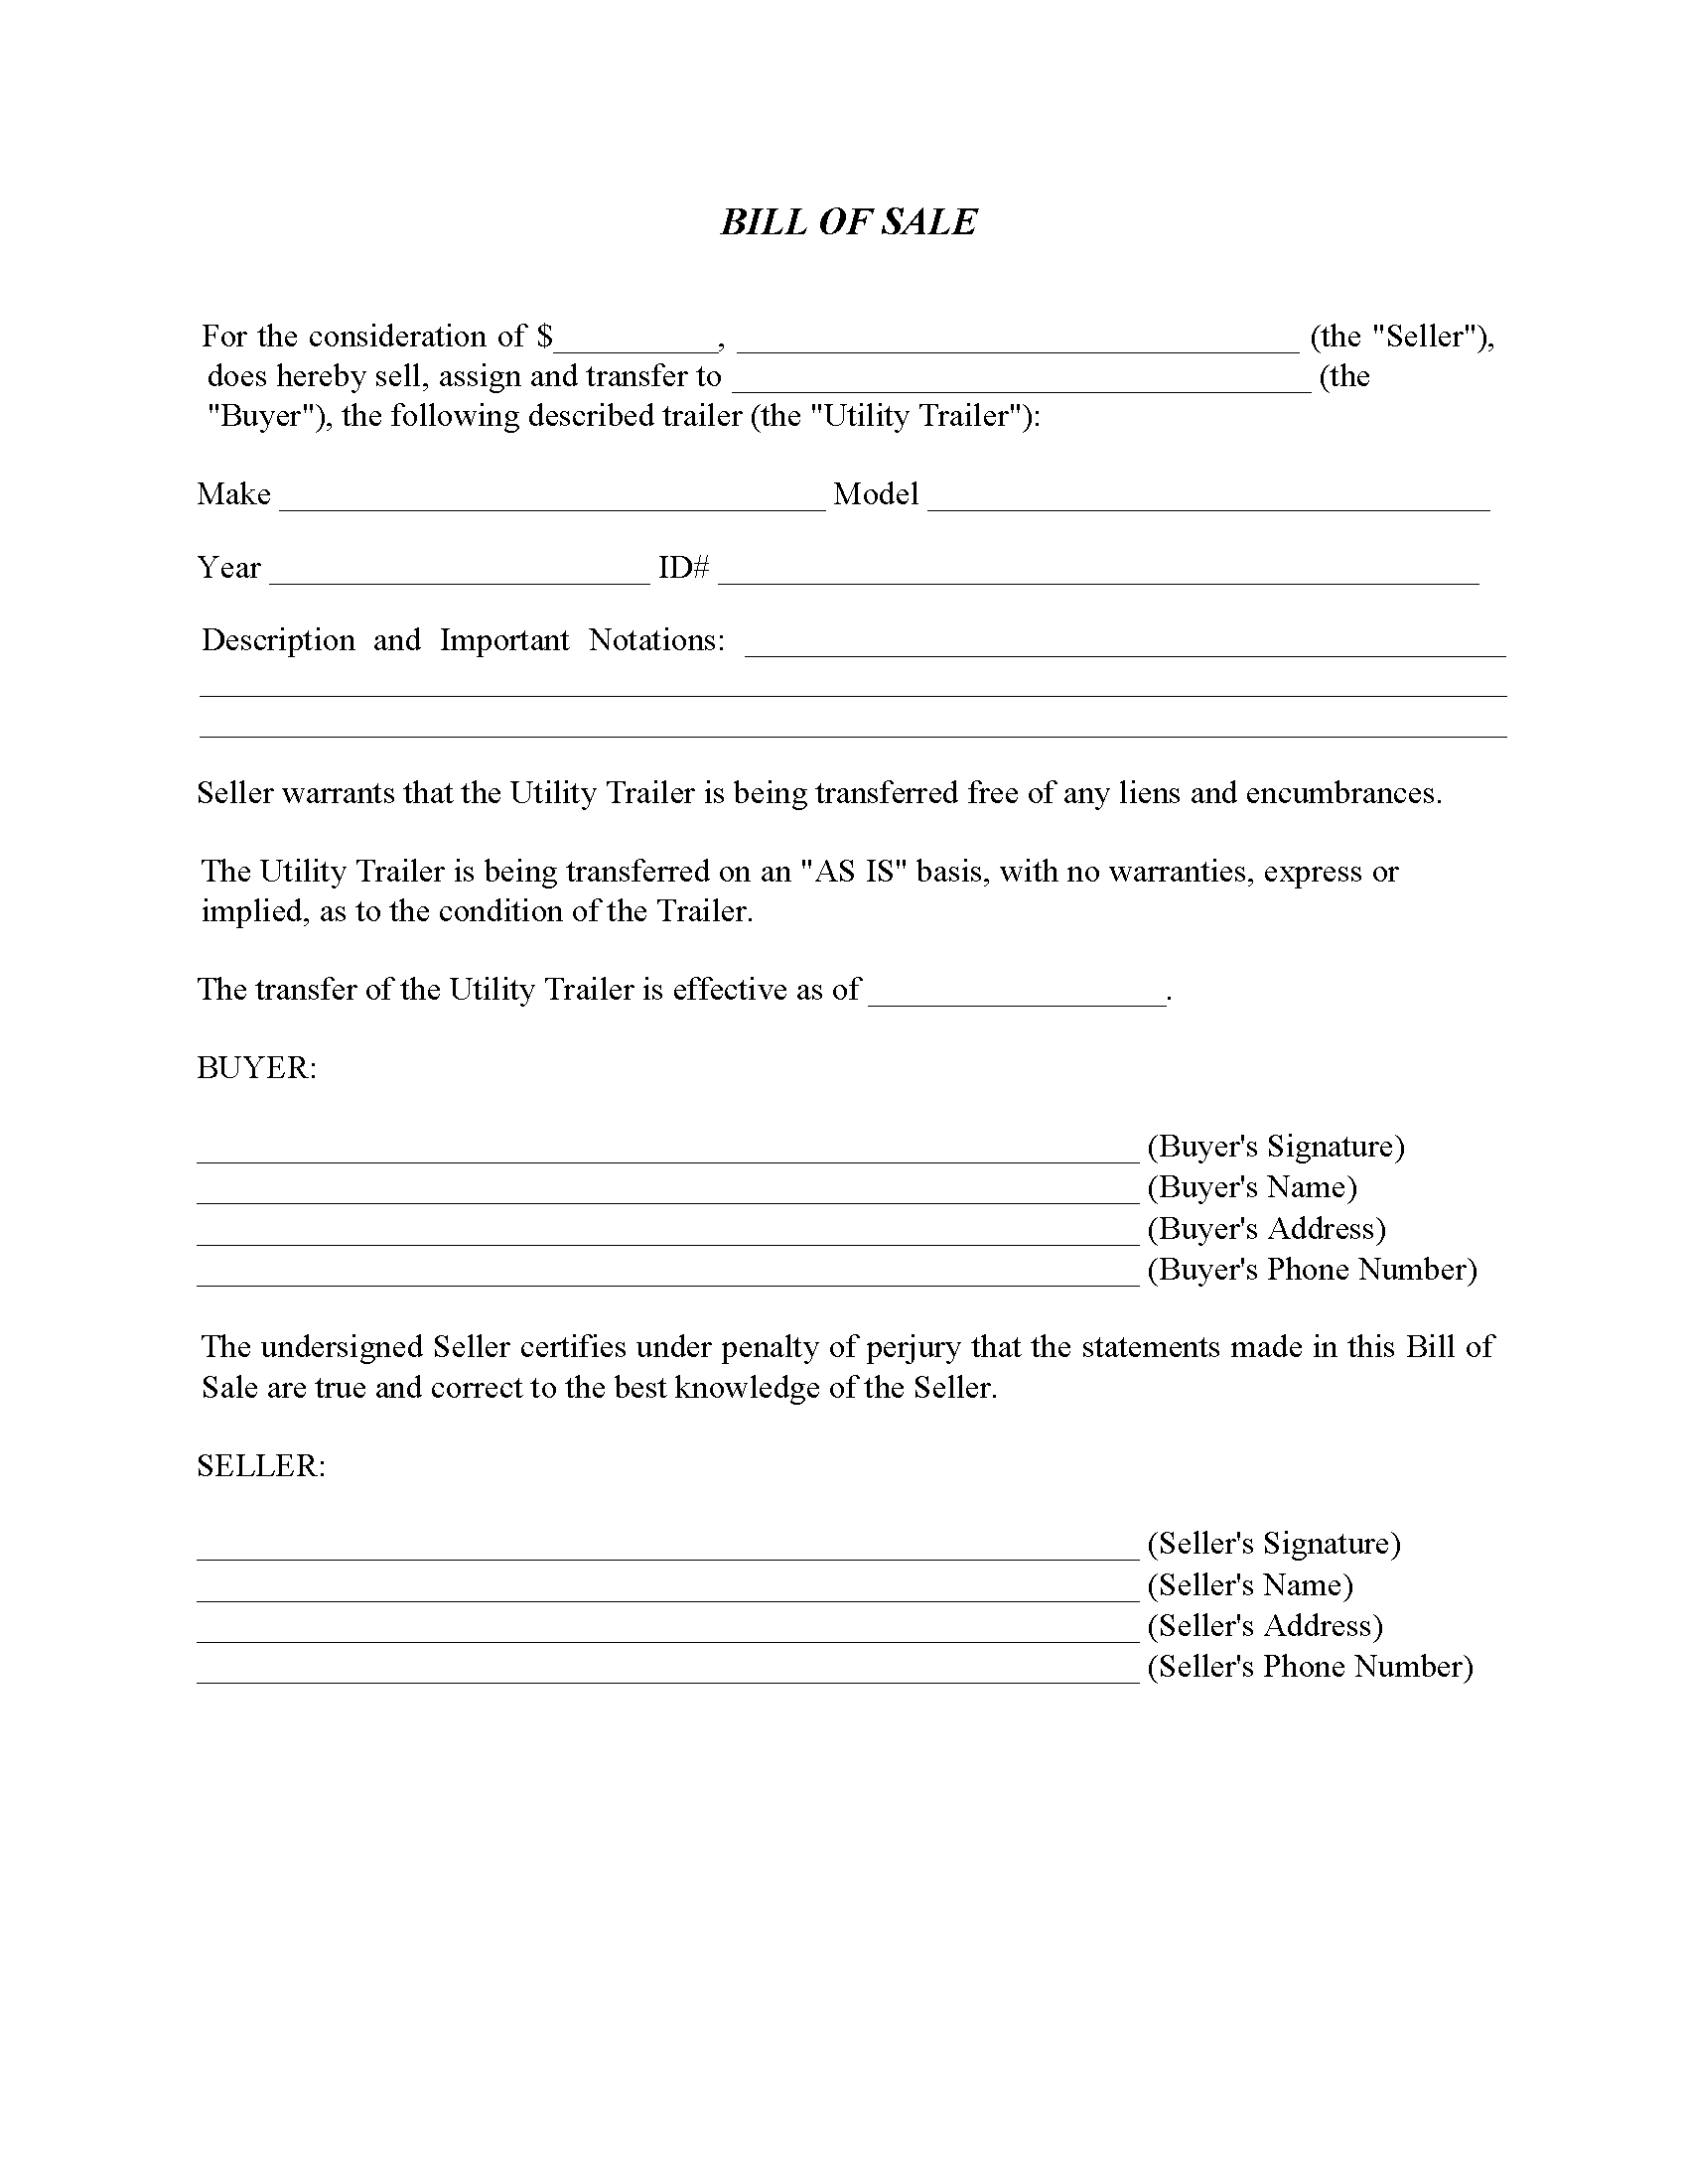 utility-trailer-bill-of-sale-form-fillable-pdf-free-printable-legal